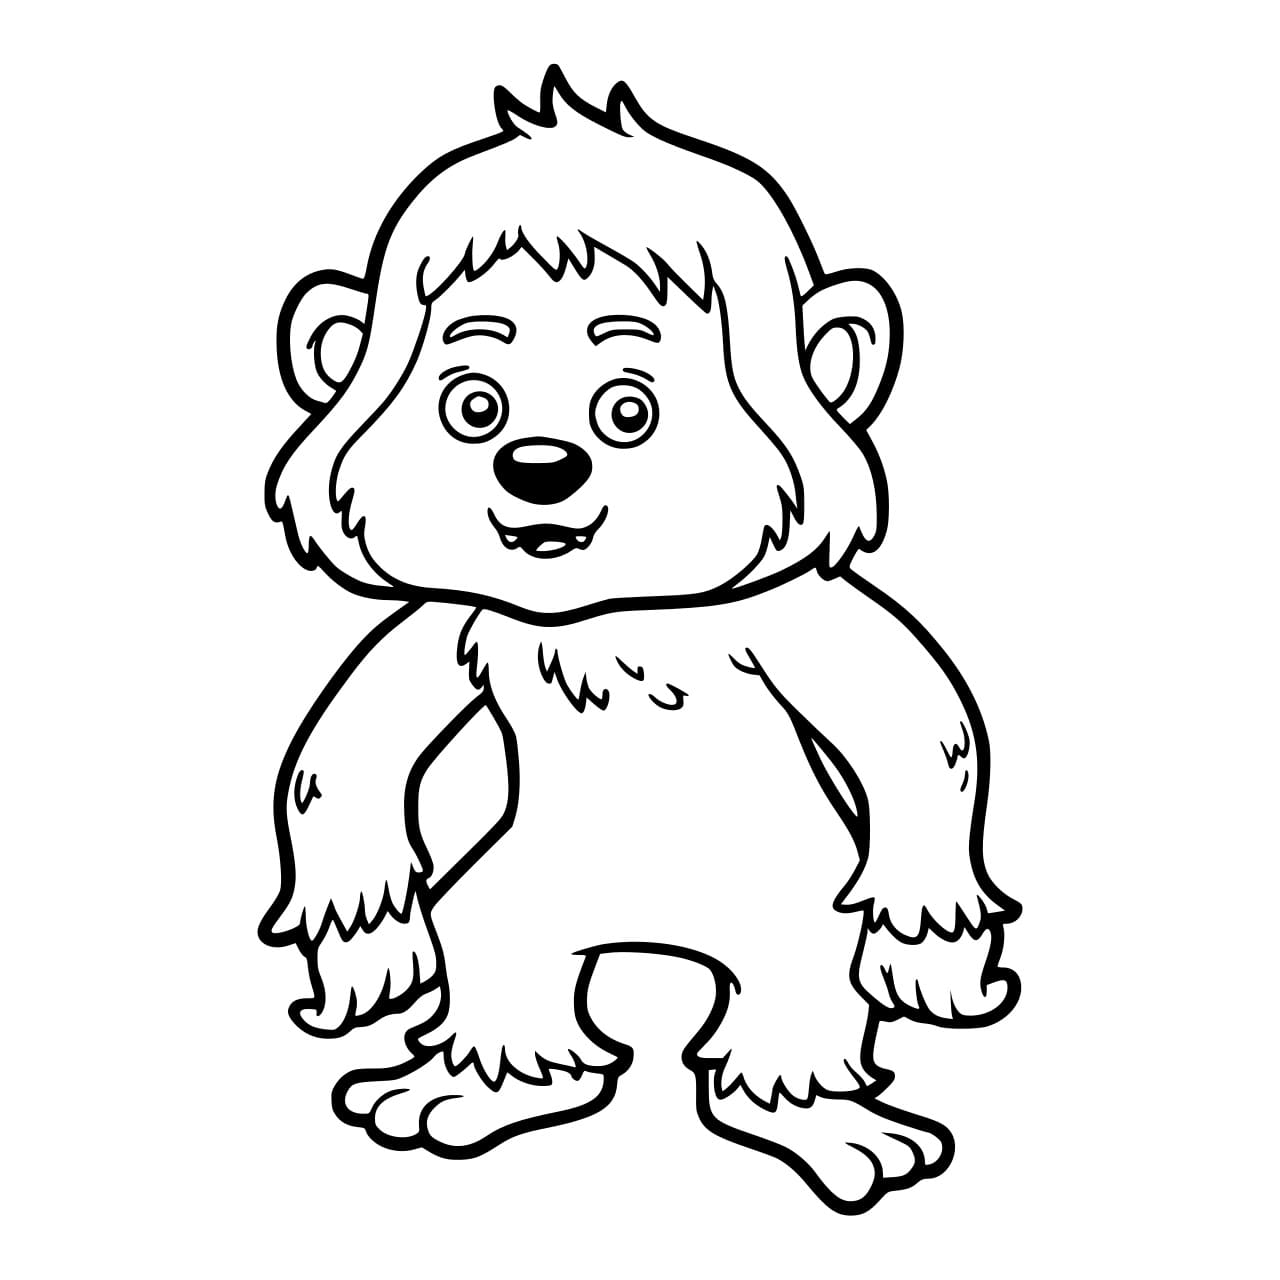 Cute yeti coloring page